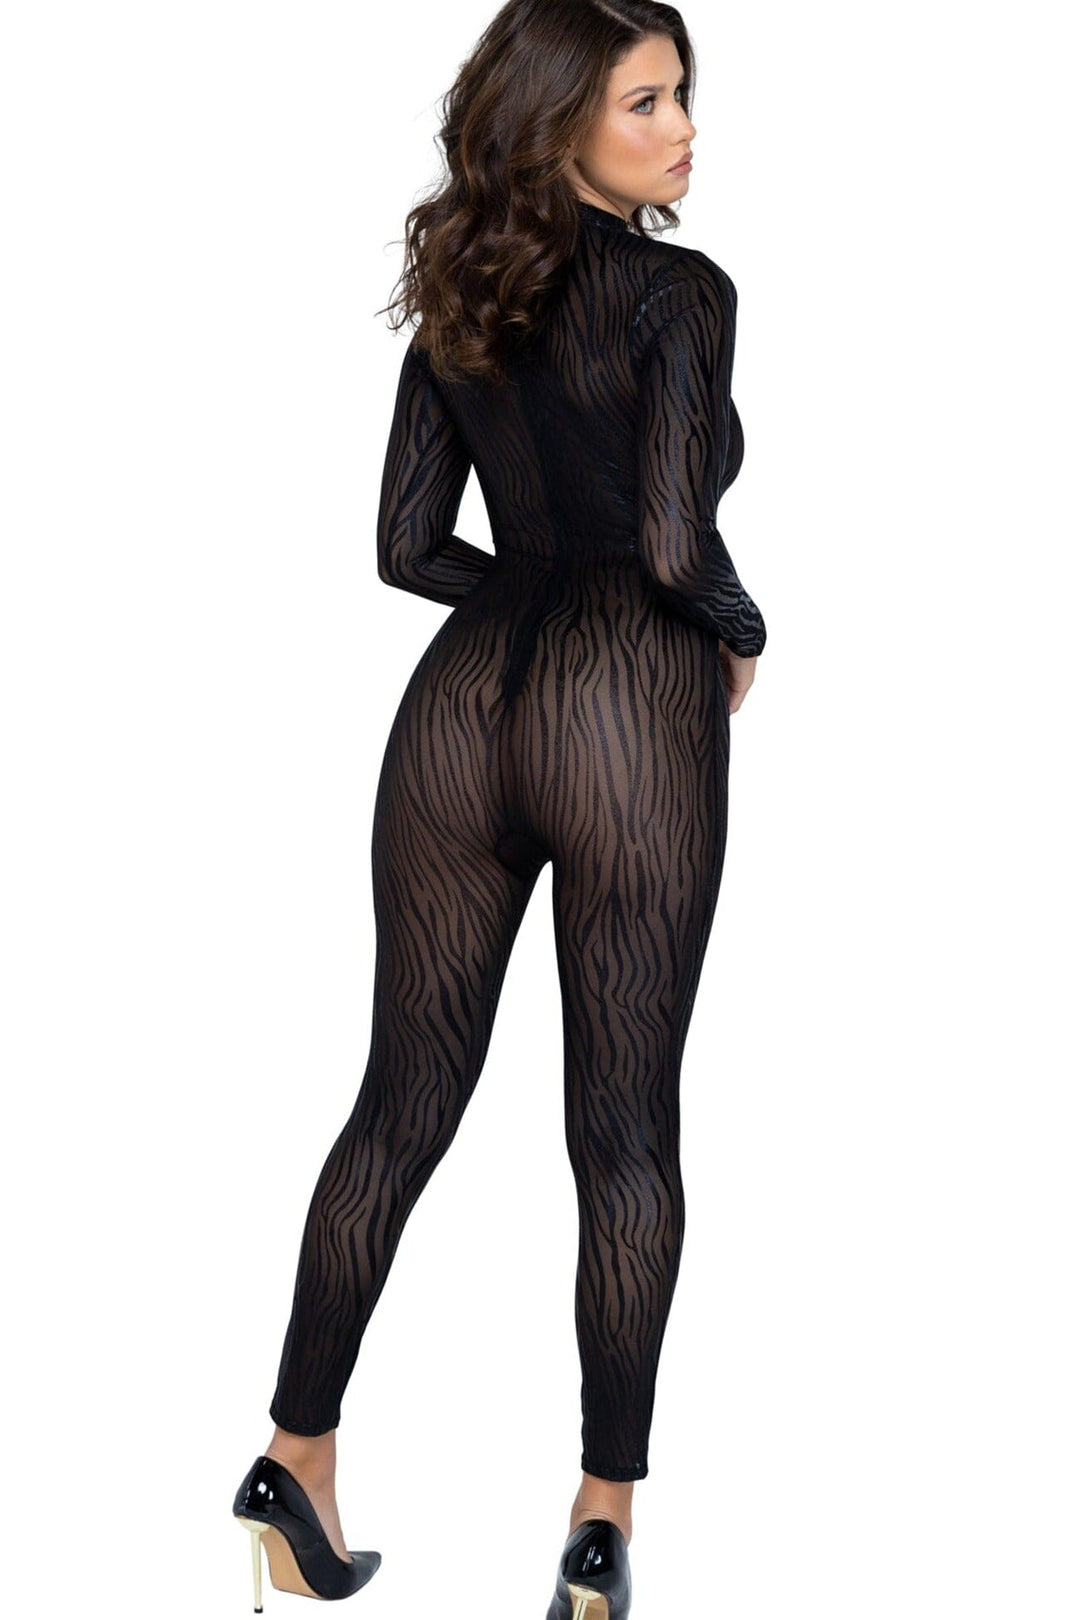 Wild Stripe Catsuit-Fetish Catsuits-Roma Confidential-SEXYSHOES.COM